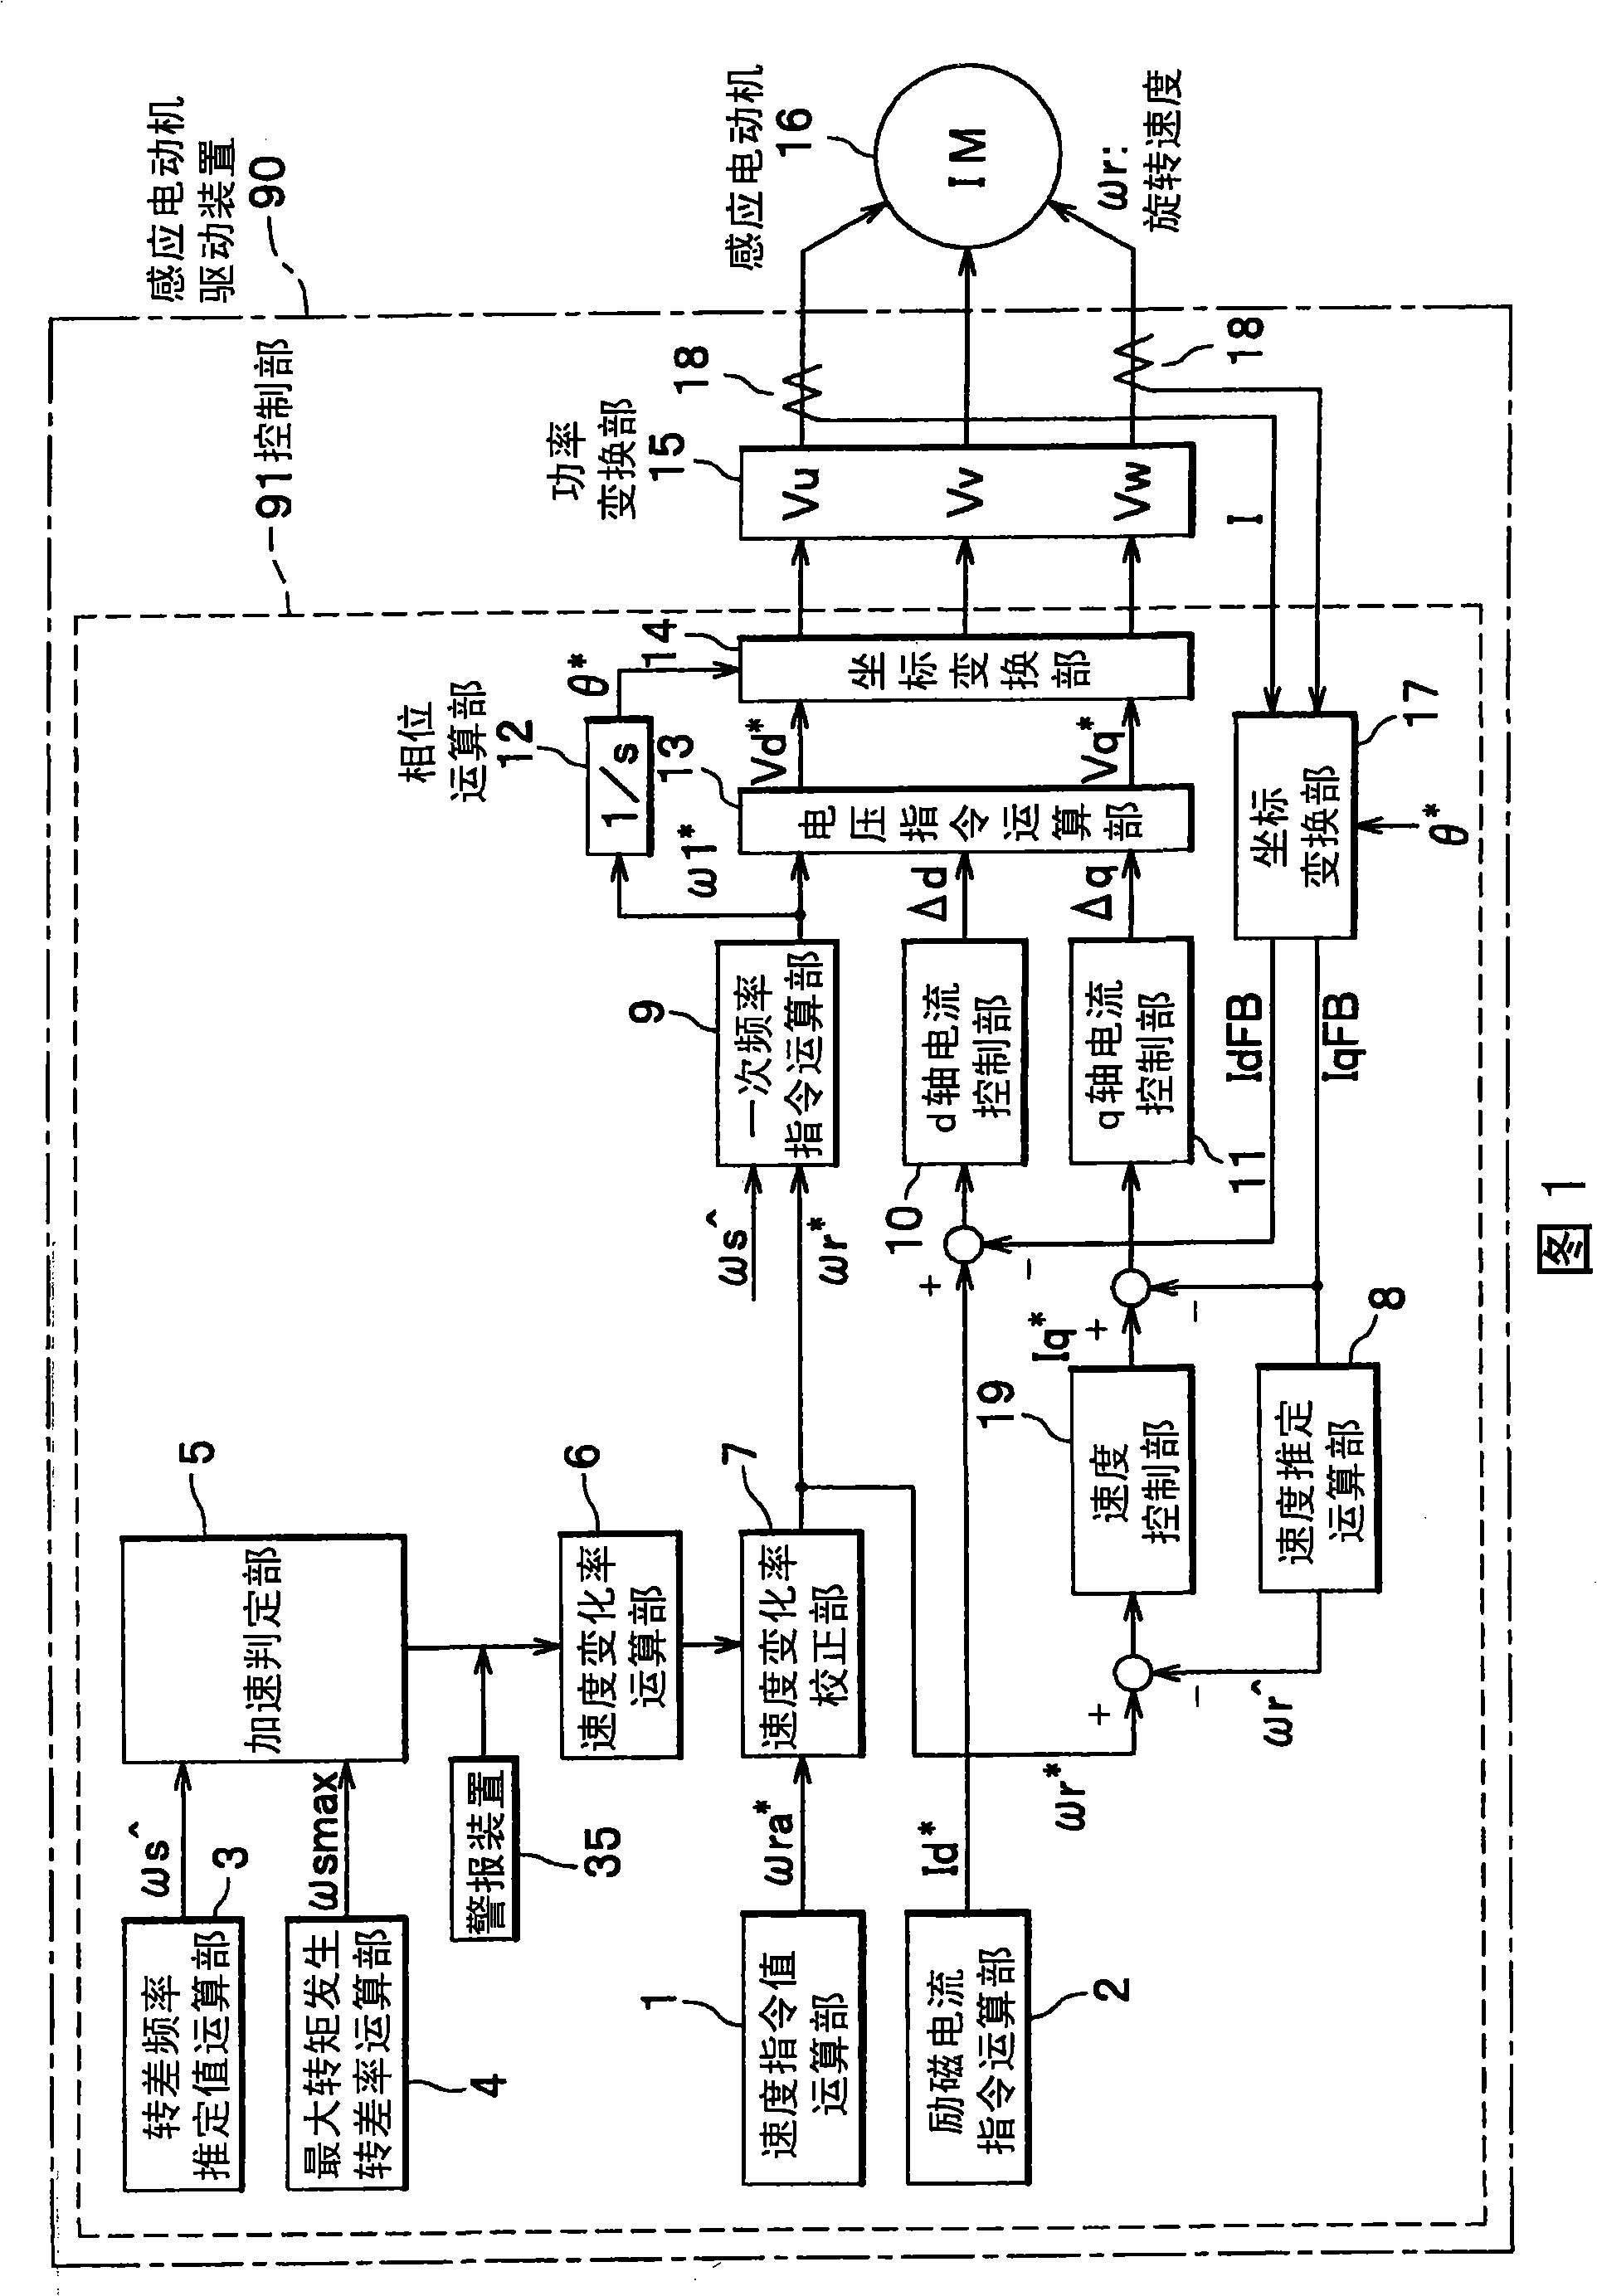 Induction motor drive unit, motor drive system, and elevating system